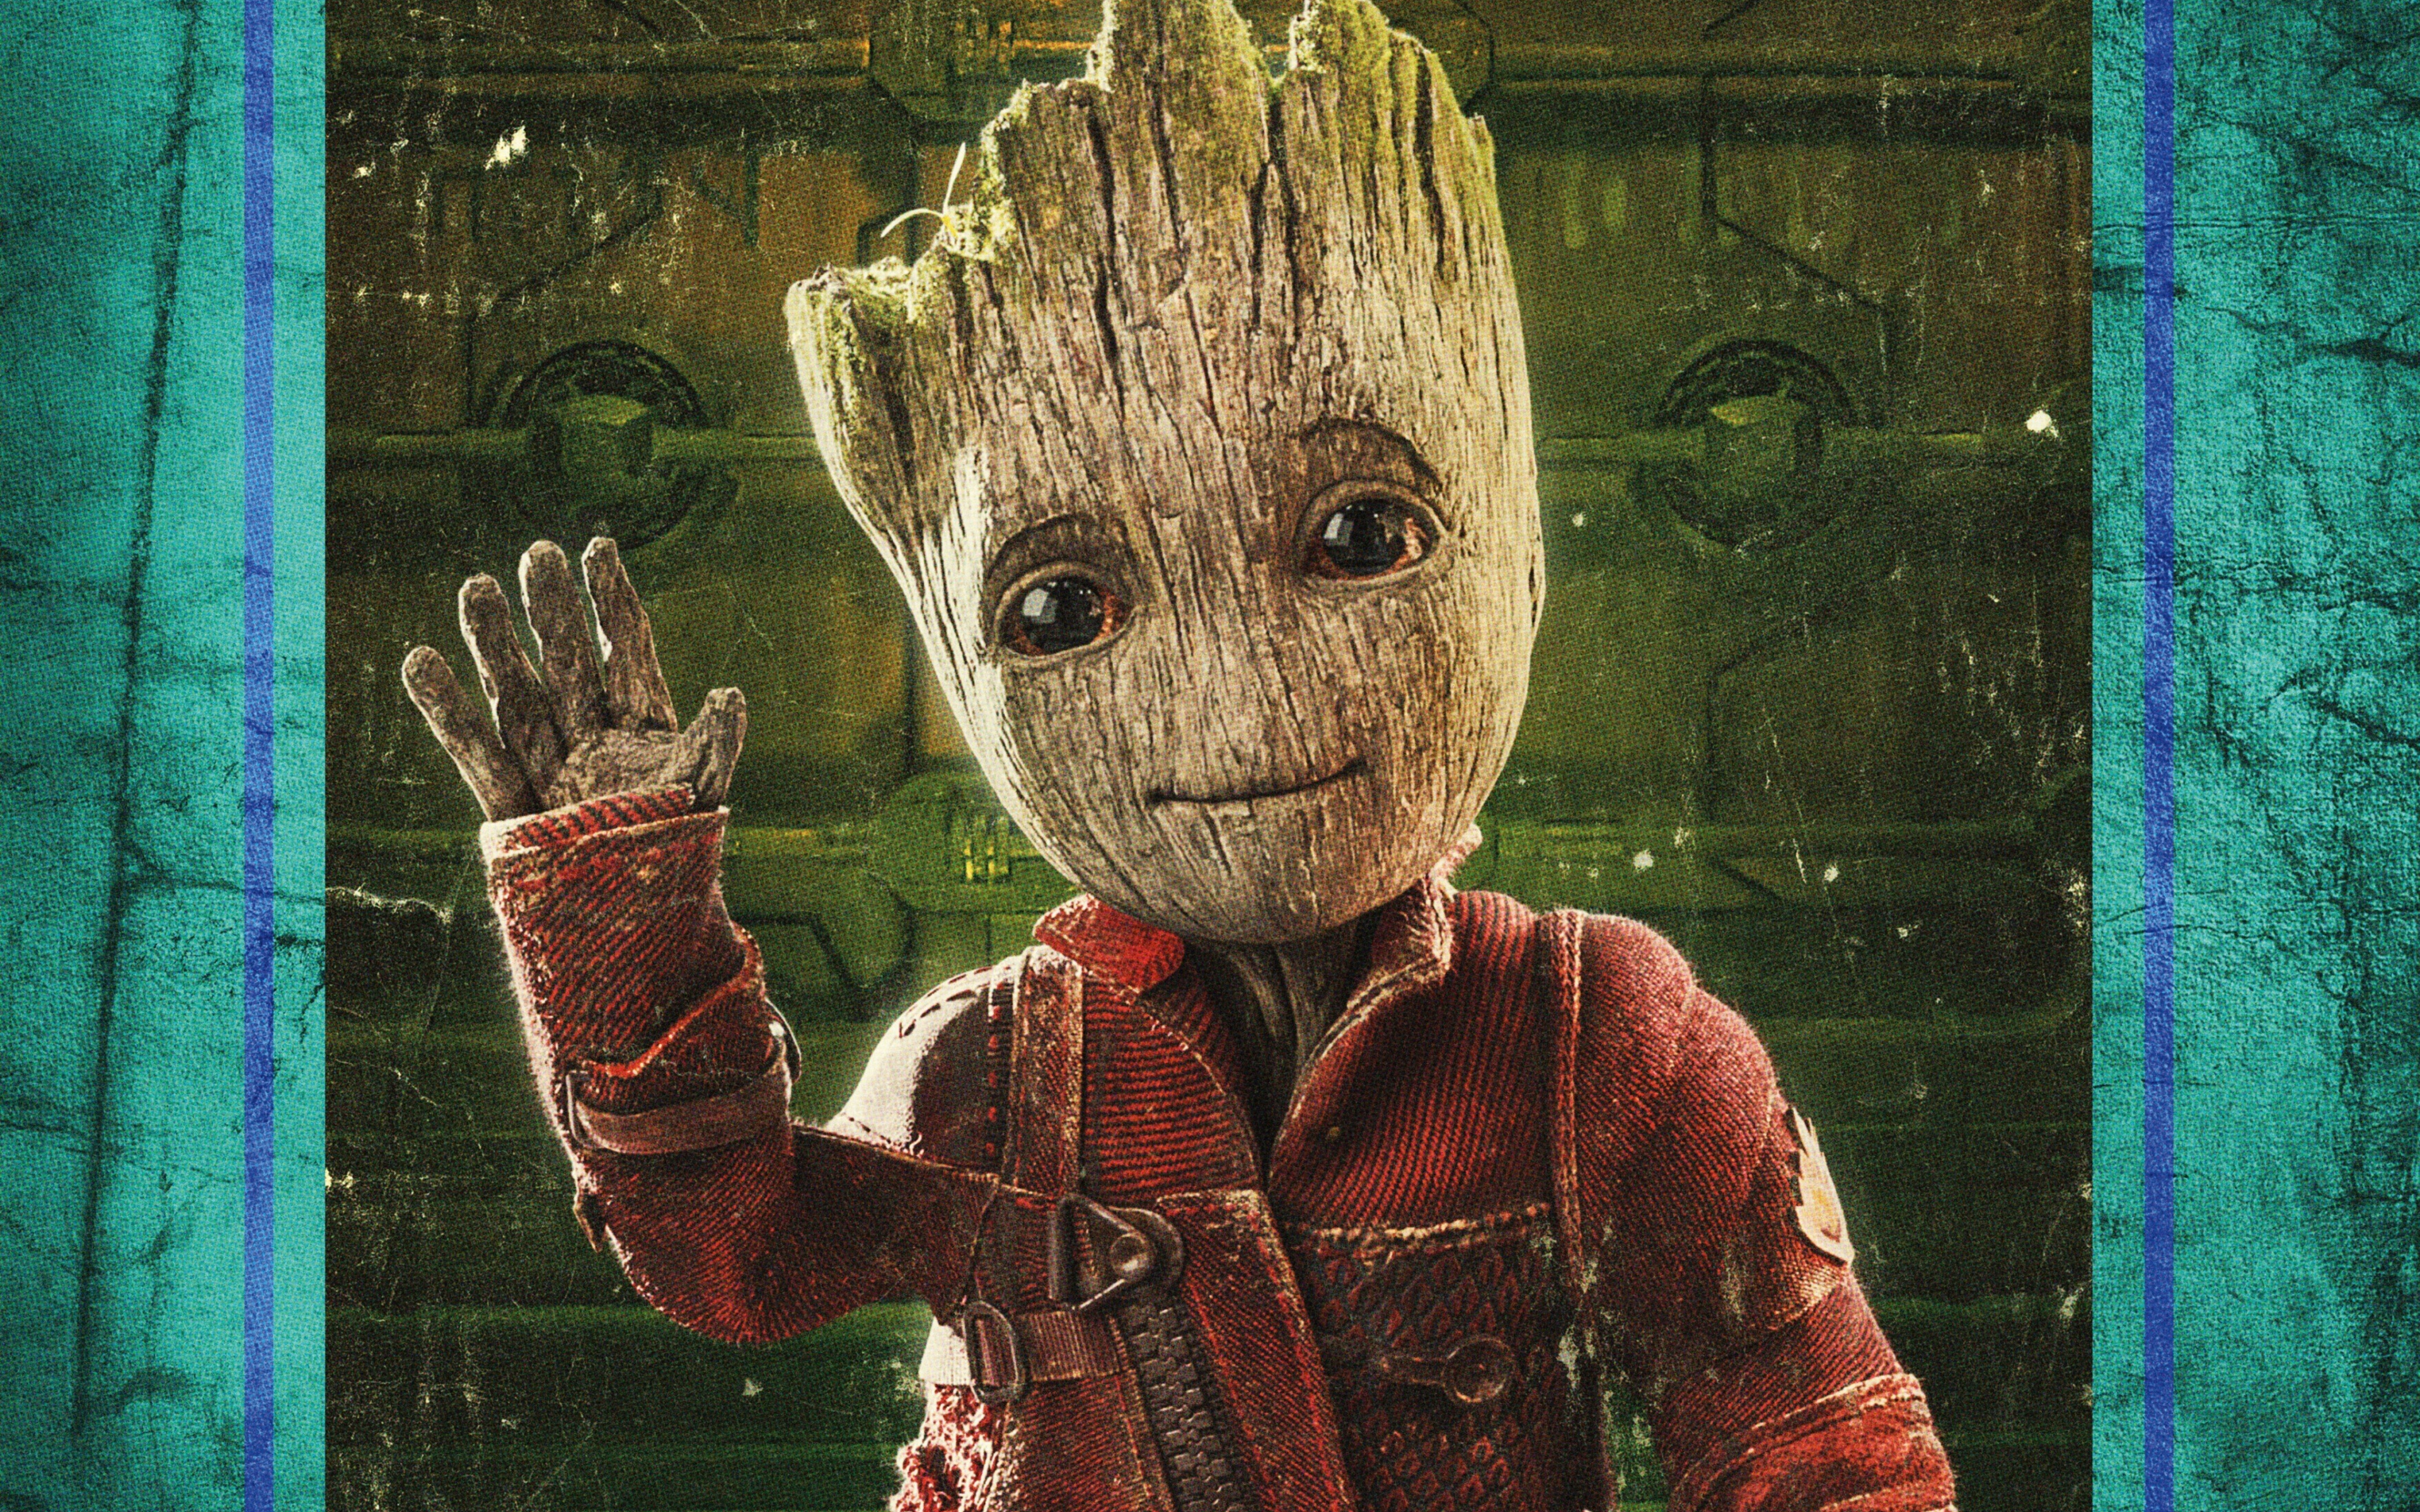 Download 3840x2400 wallpaper baby groot guardians of the galaxy